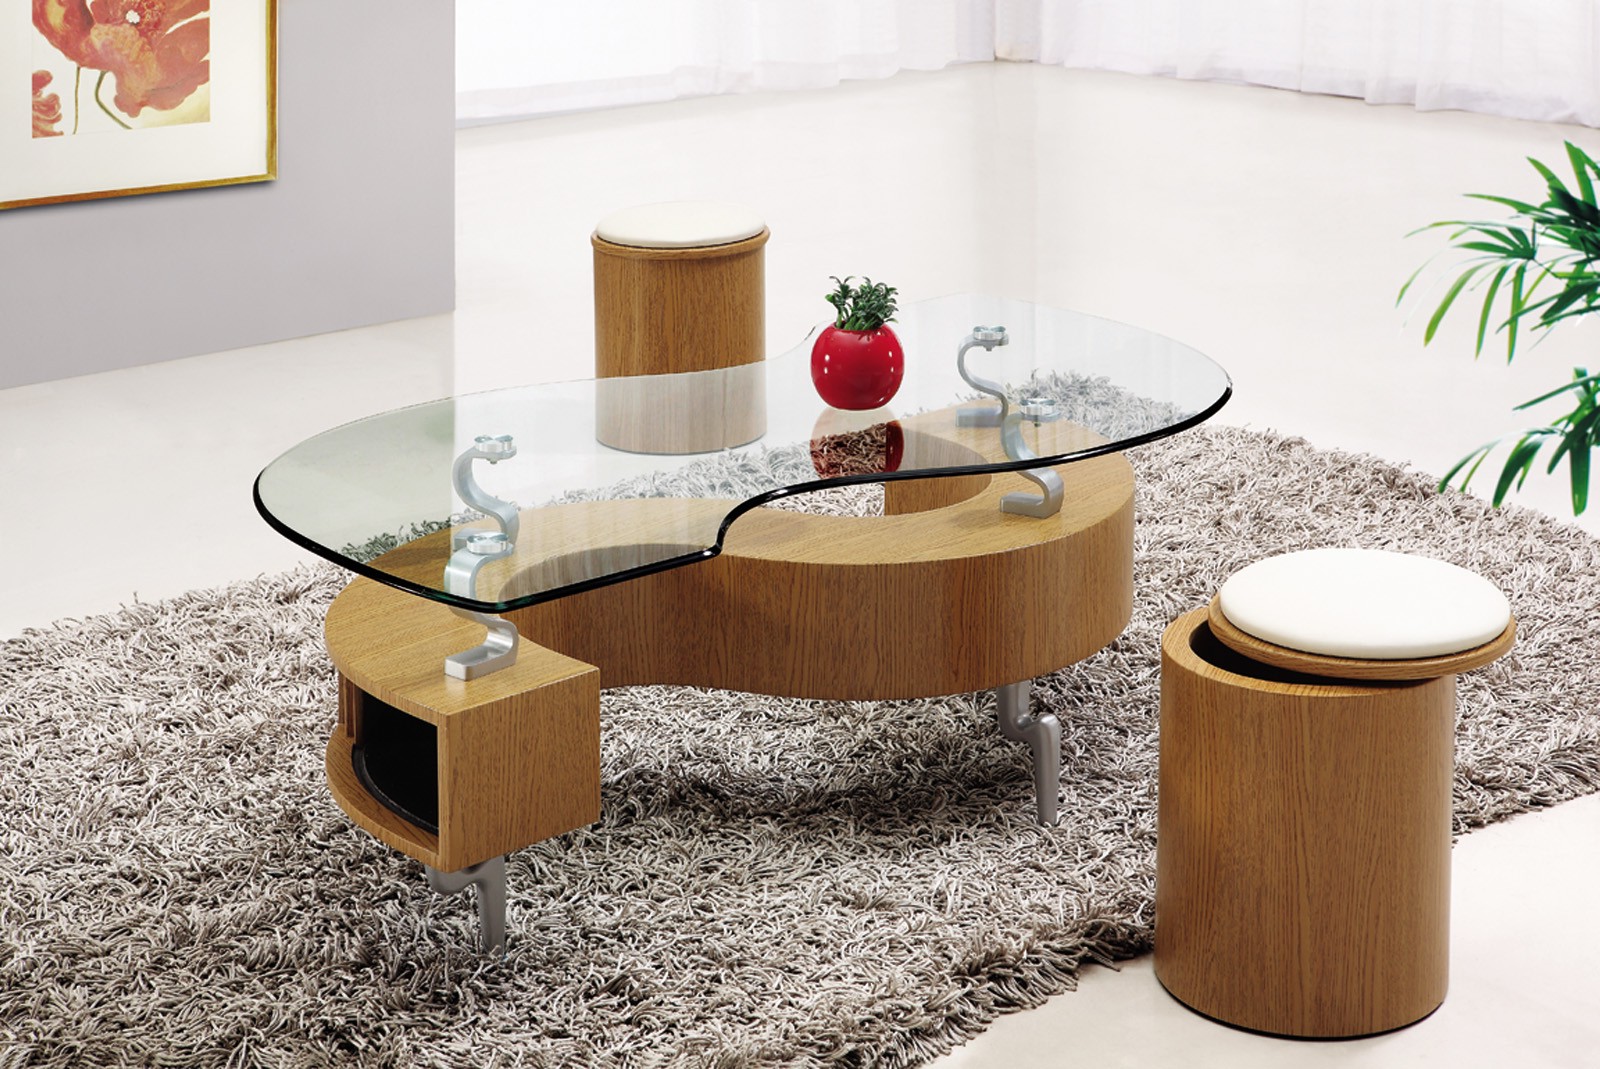 Coffee Table With Chairs Underneath